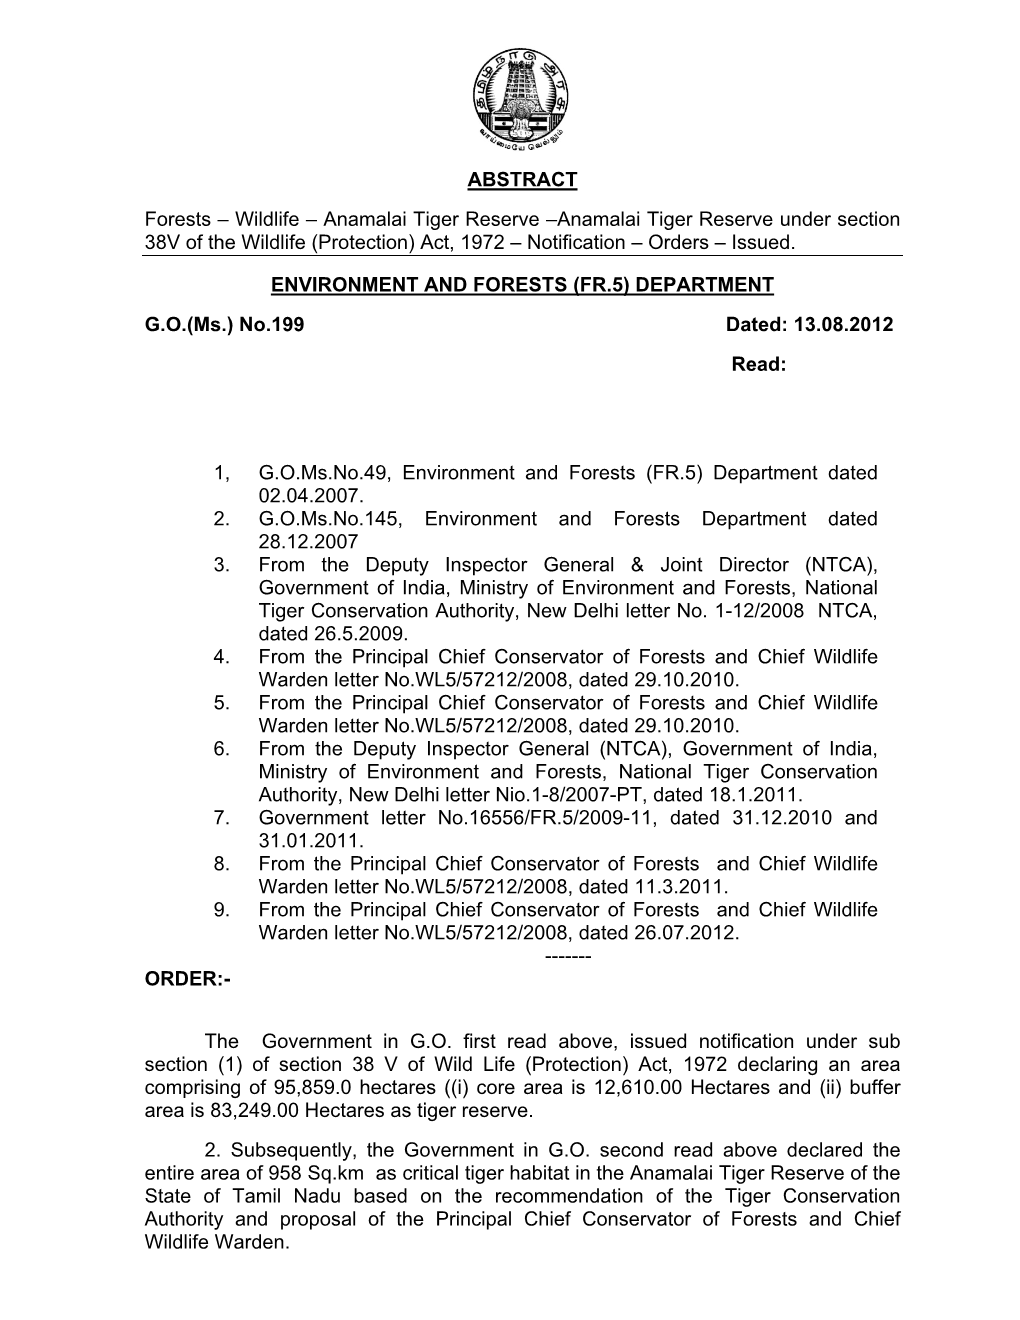 Anamalai Tiger Reserve –Anamalai Tiger Reserve Under Section 38V of the Wildlife (Protection) Act, 1972 – Notification – Orders – Issued